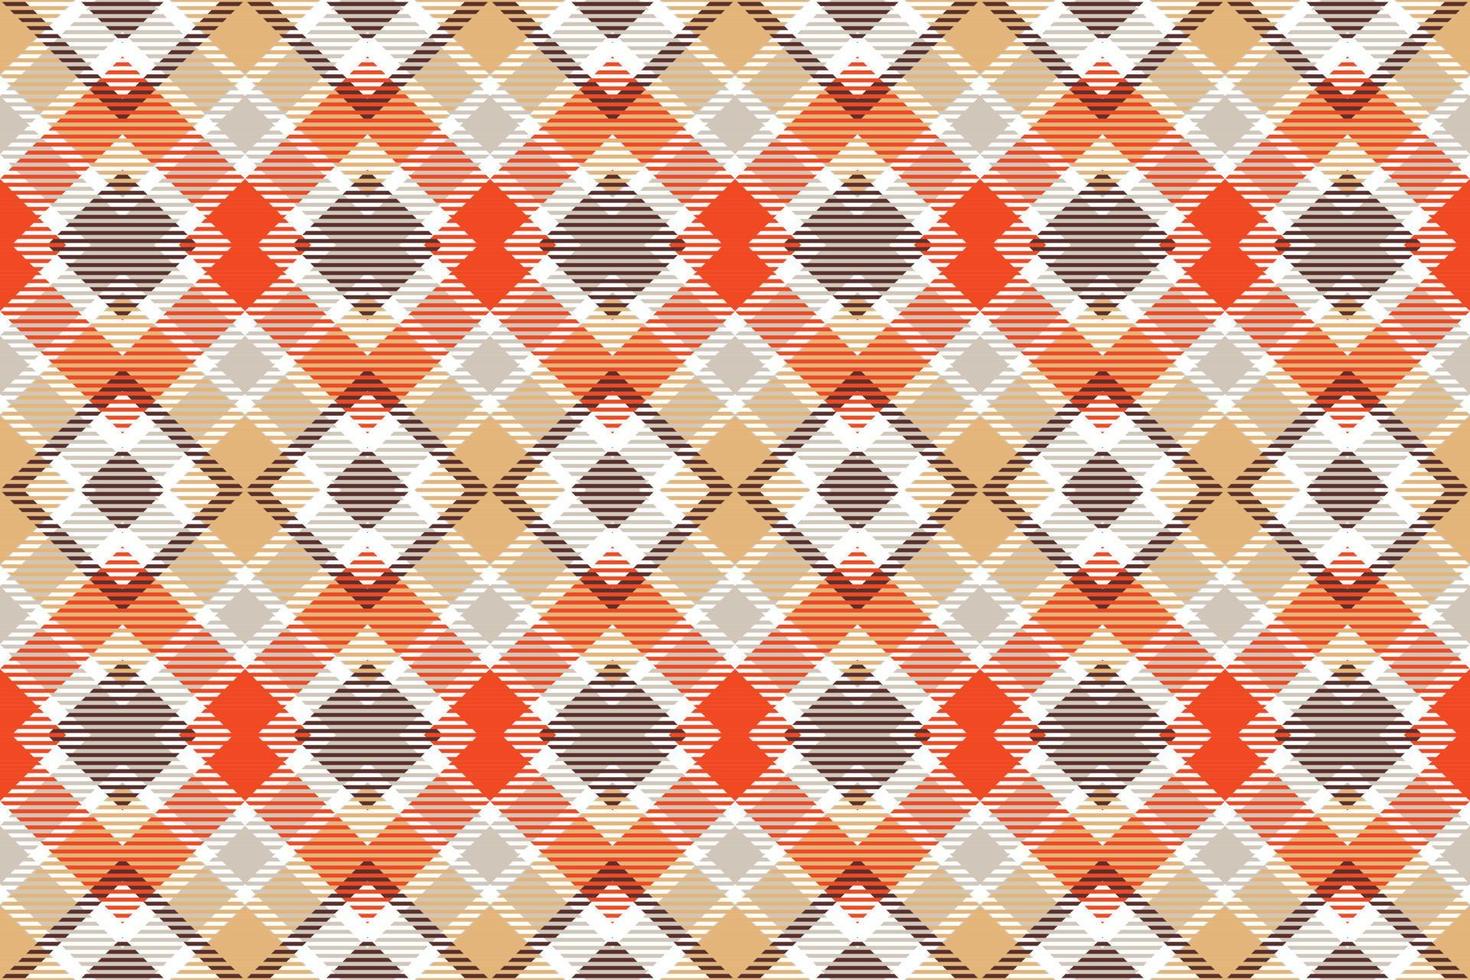 Checkered Plaids pattern seamless is a patterned cloth consisting of criss crossed, horizontal and vertical bands in multiple colours.plaid Seamless For scarf,pyjamas,blanket,duvet,kilt large shawl. vector